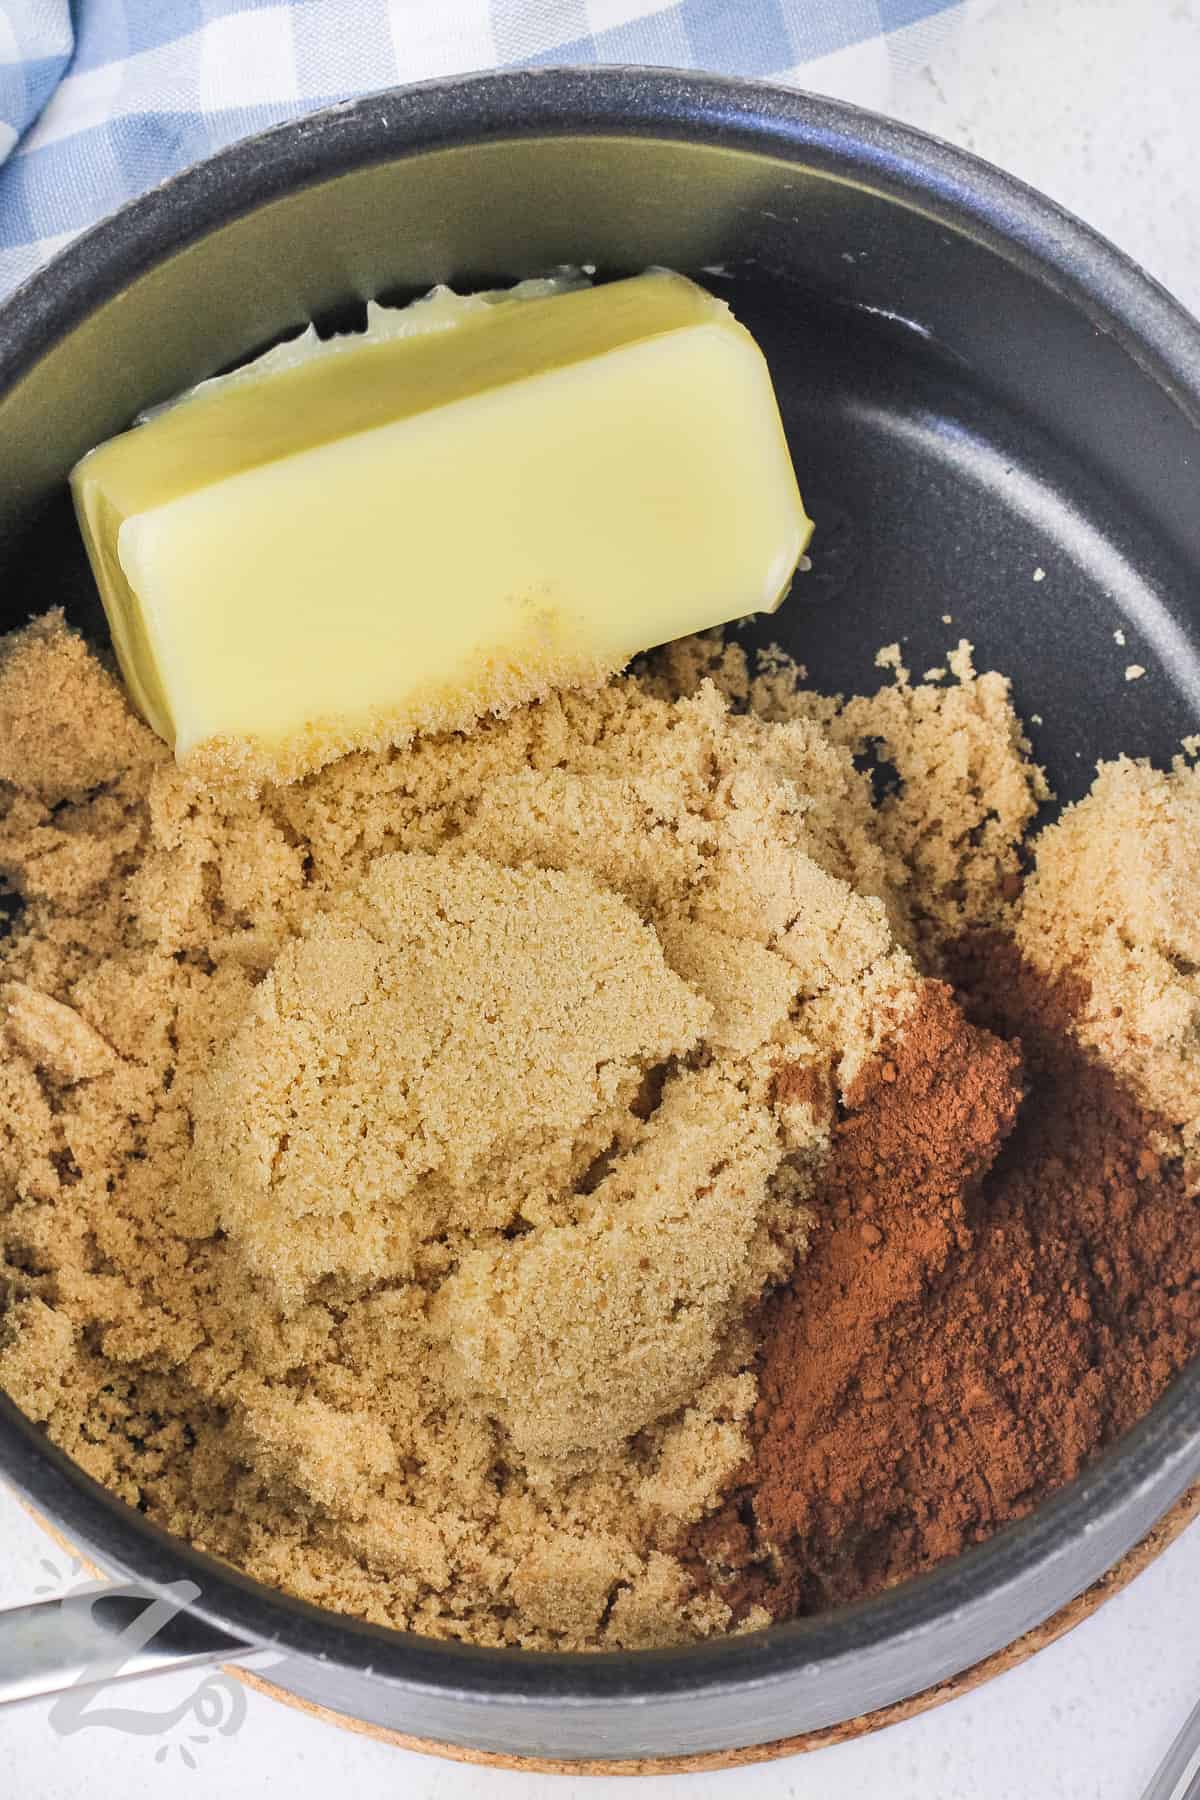 Butter and sugar being combined in a sauce pan